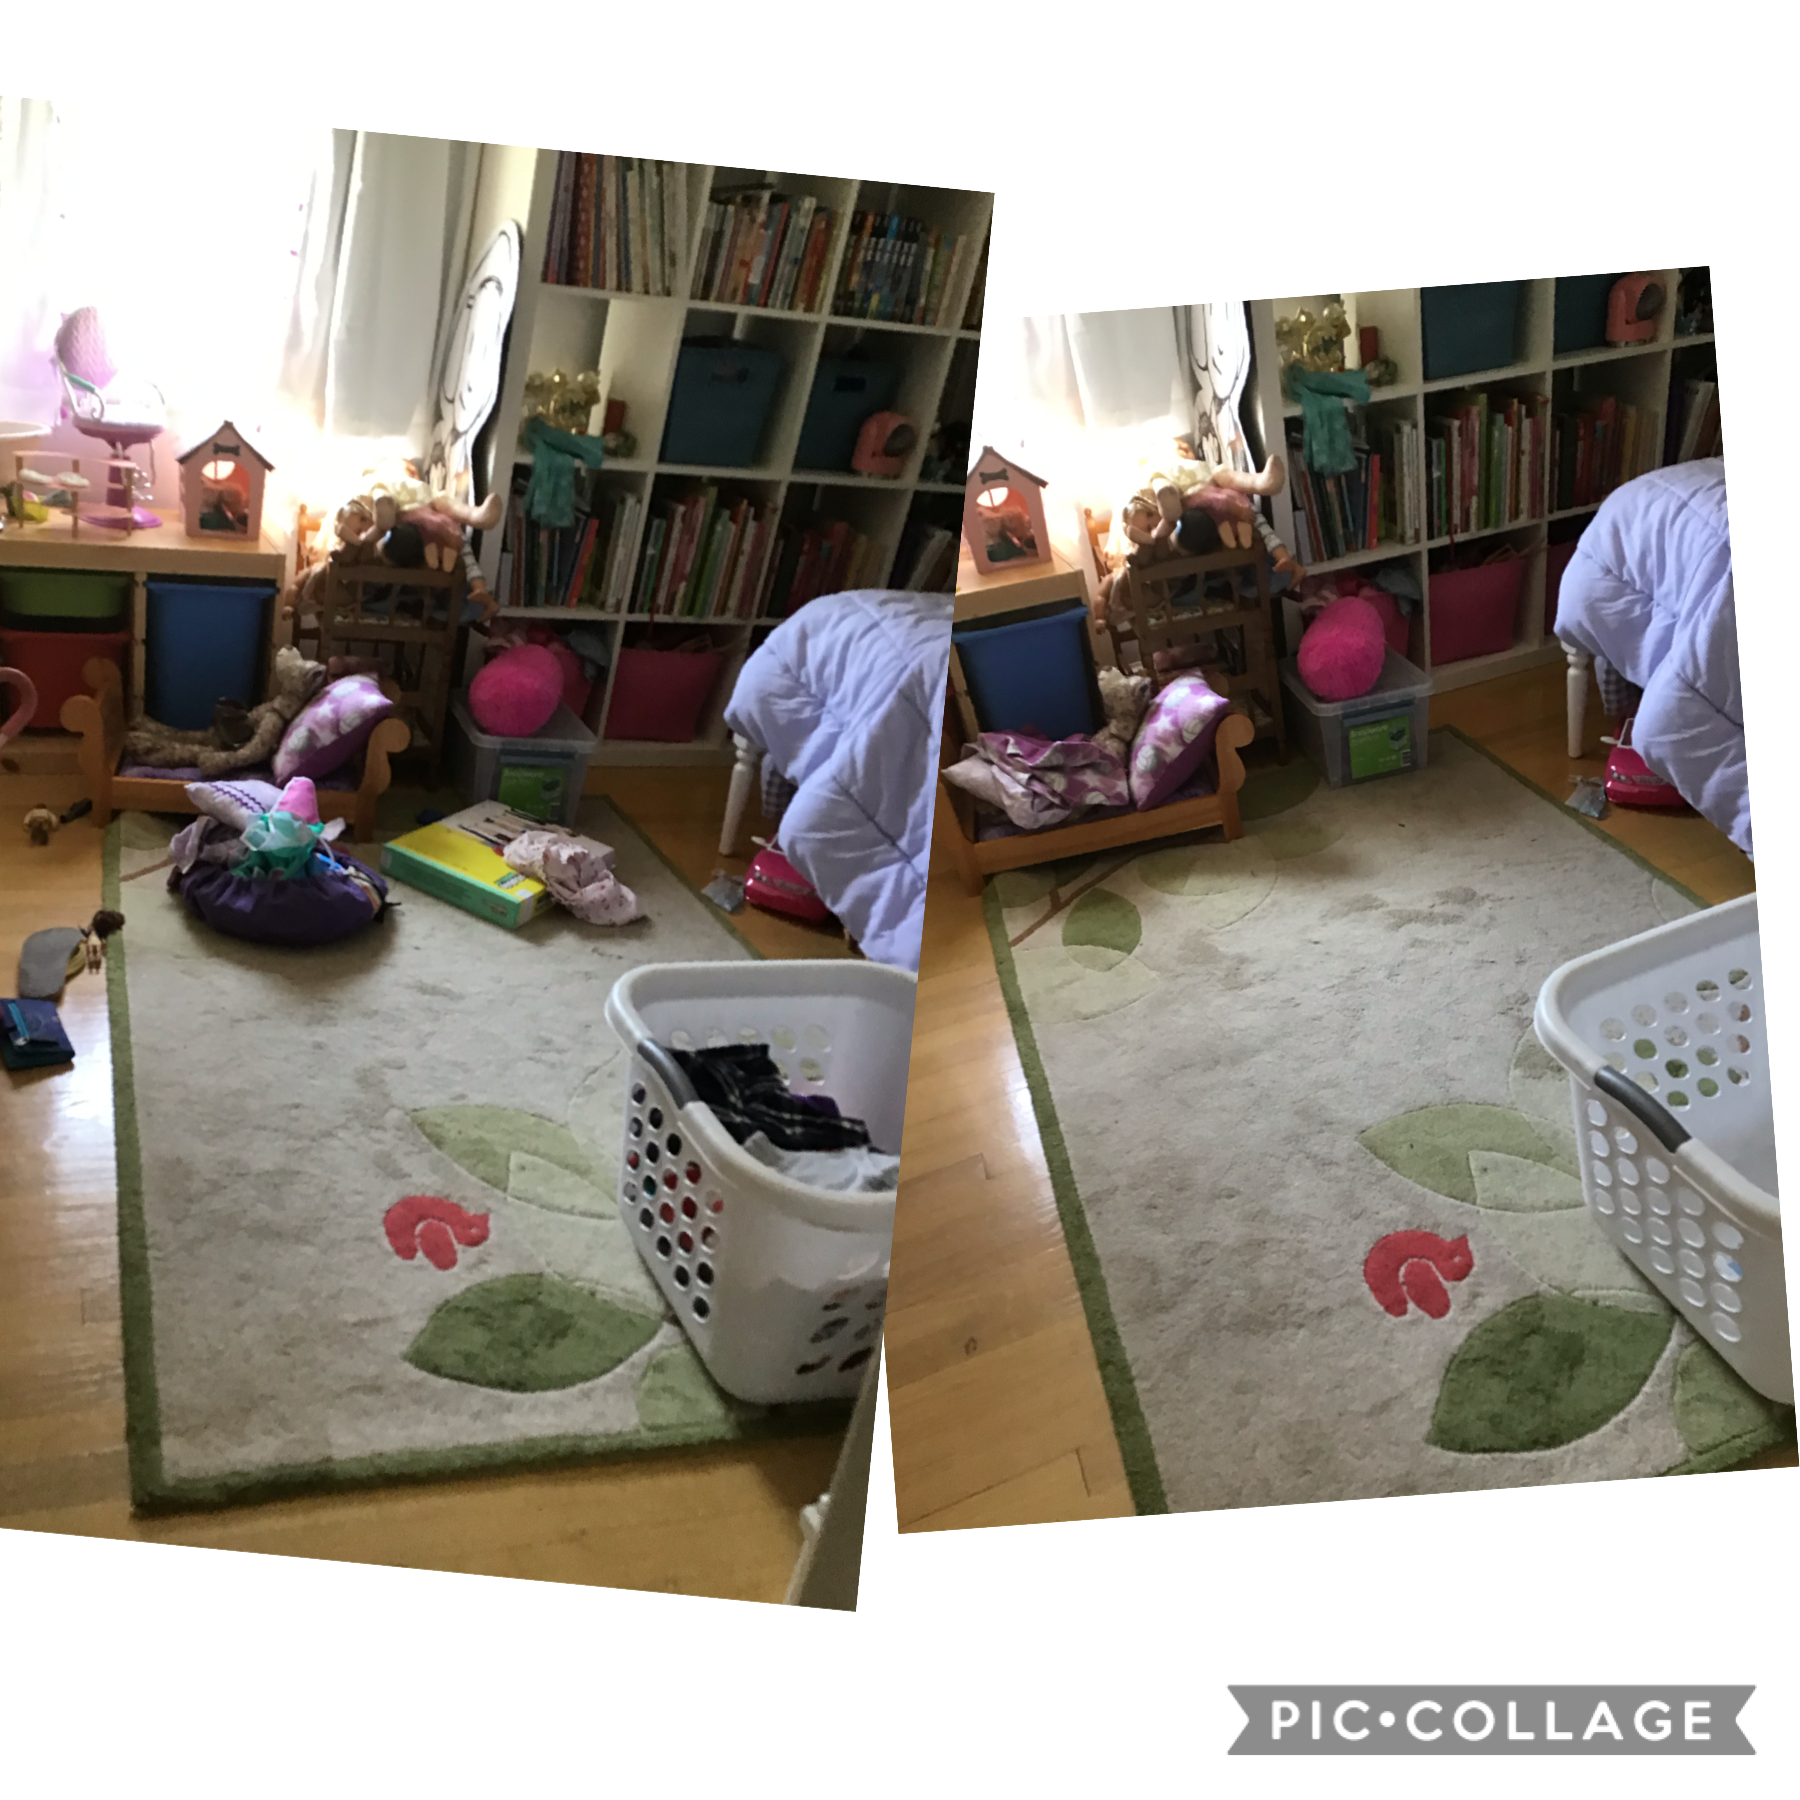 Cleaning Georgia’s room for $20. Before is on the left, and after is on the right.